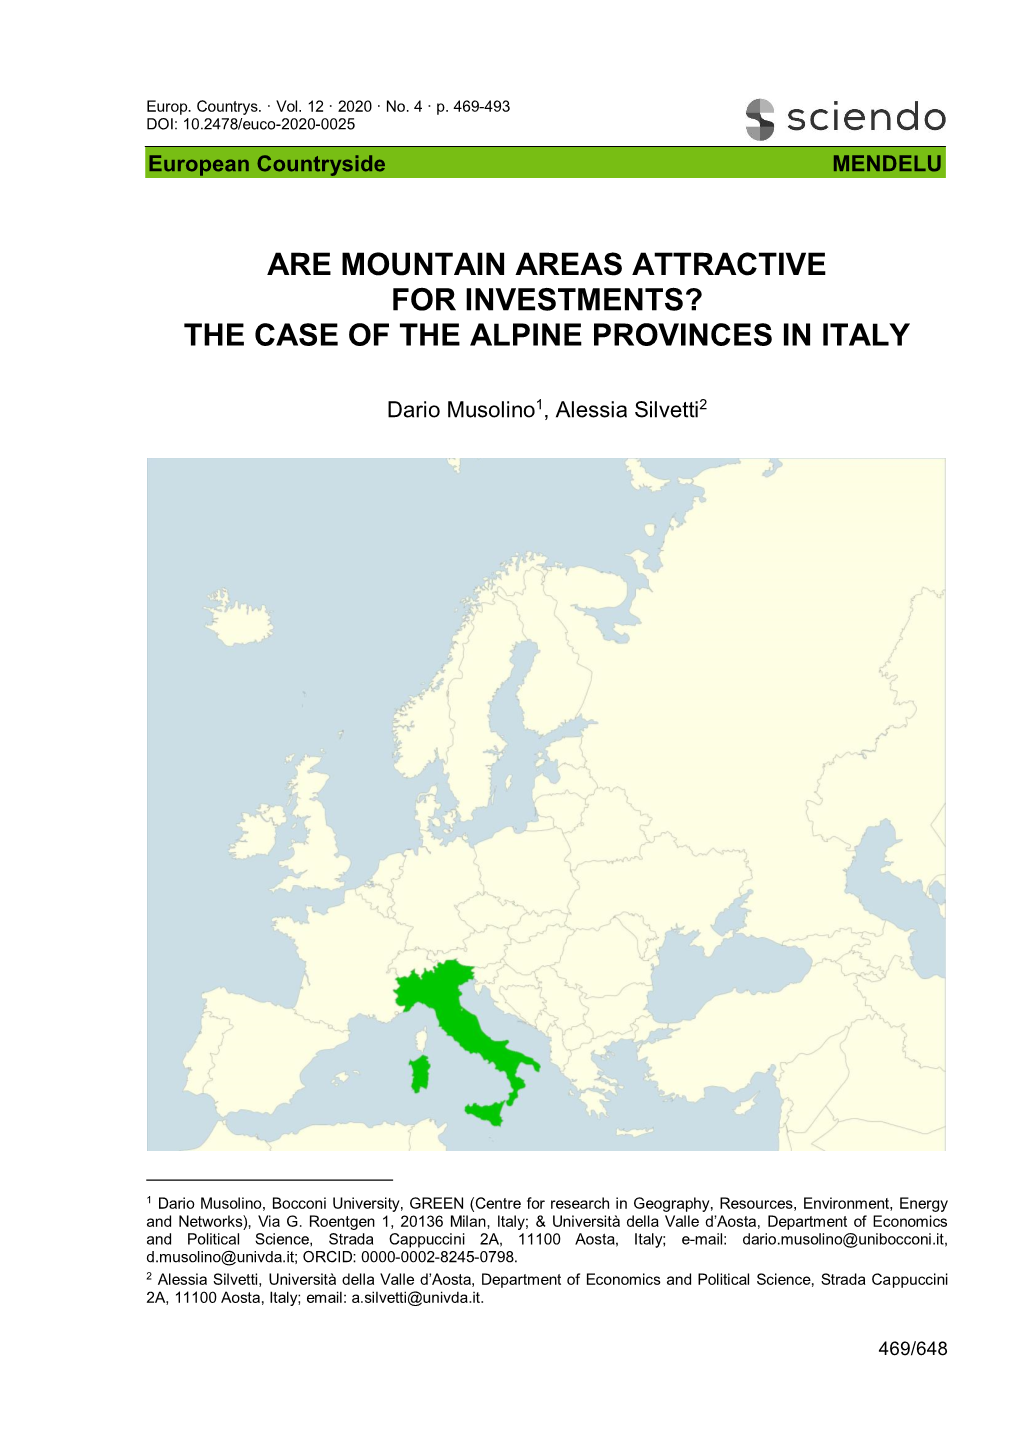 Are Mountain Areas Attractive for Investments? the Case of the Alpine Provinces in Italy